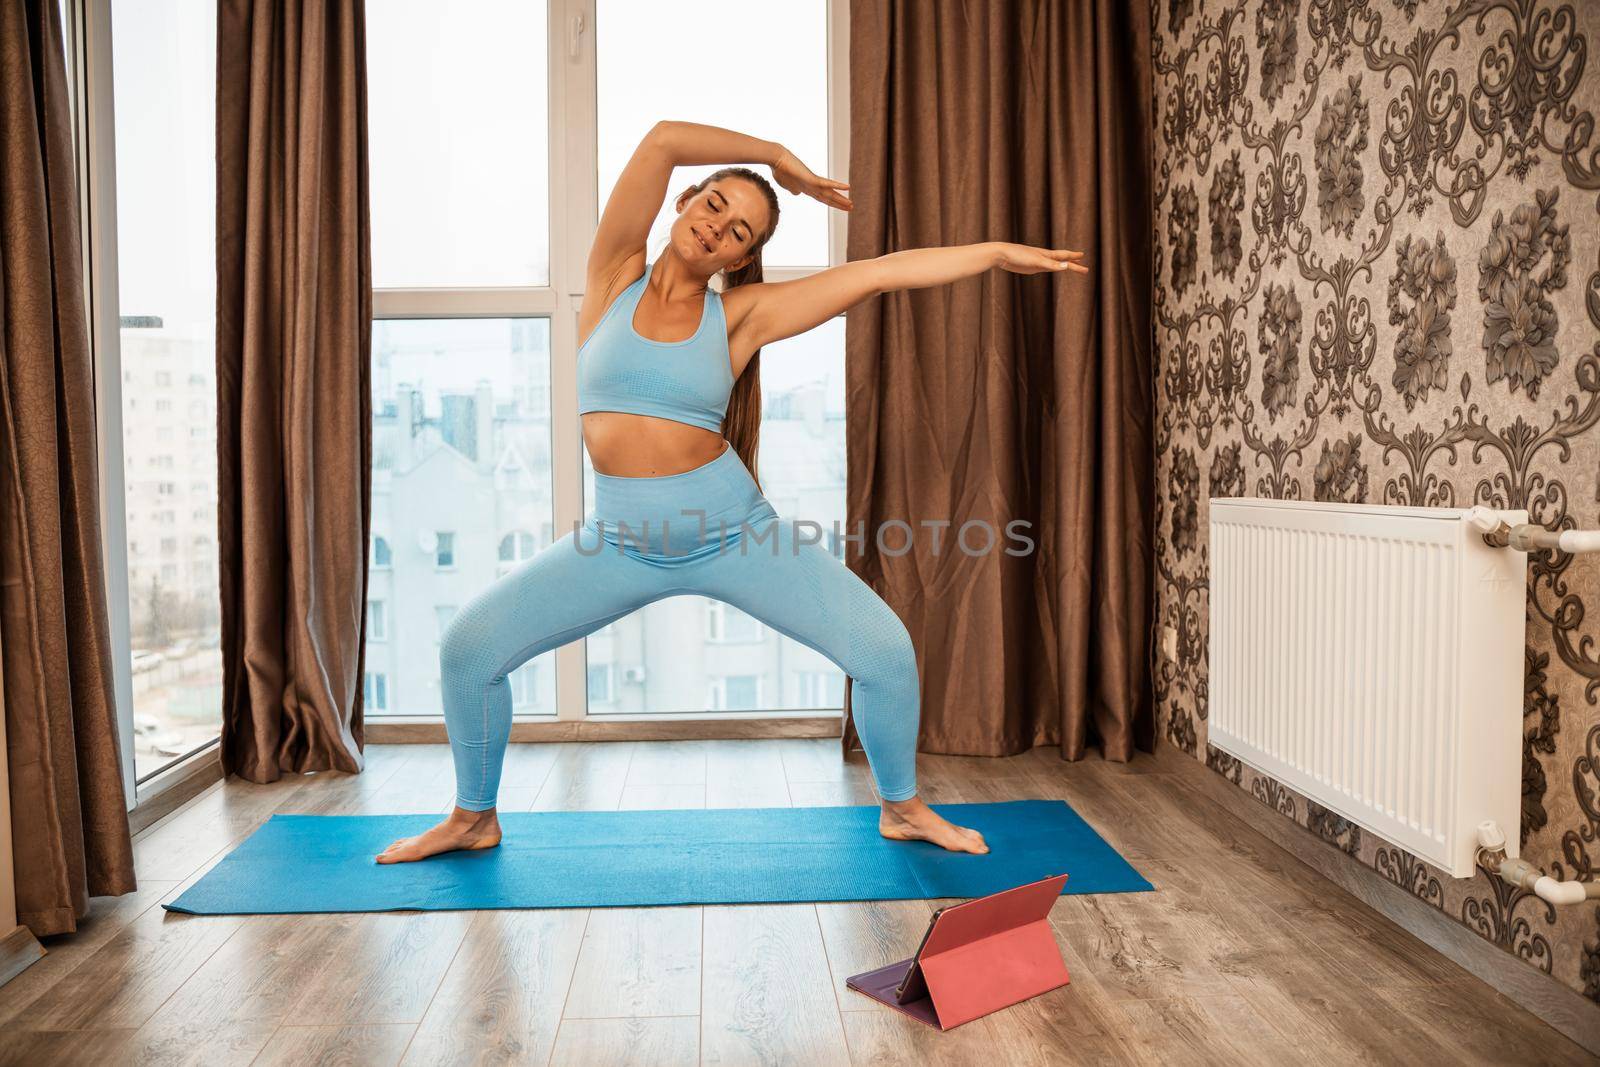 Young athletic attractive woman practicing yoga doing exercises. Works out at home or in a yoga studio, sportswear, blue pants and a full-length top indoors. Healthy lifestyle concept by Matiunina